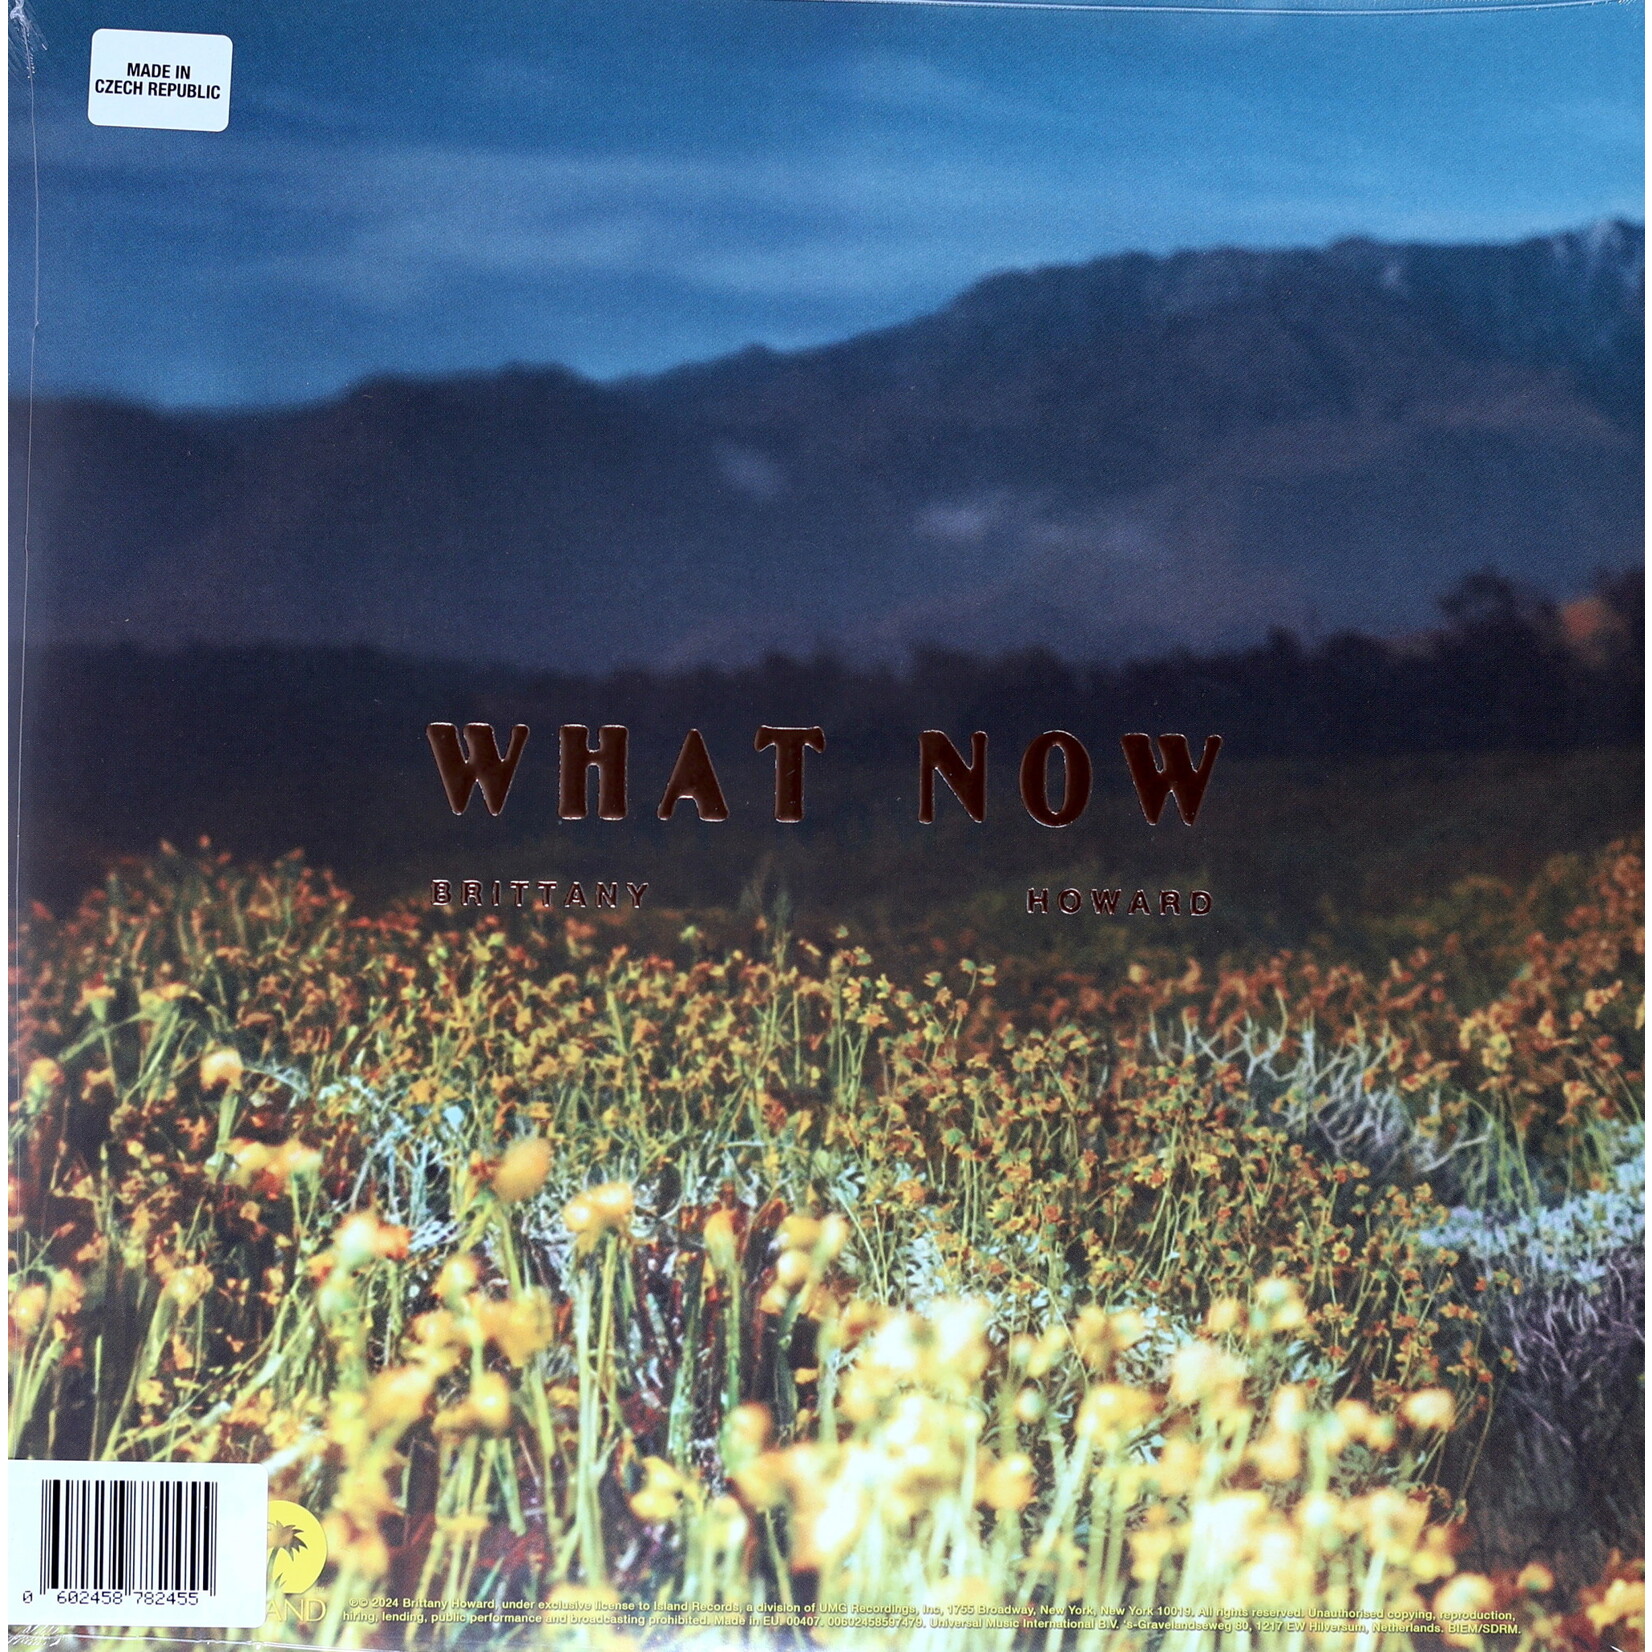 HOWARD, BRITTANY - WHAT NOW - LTD GATEFOLD COLORED YELLOW LP